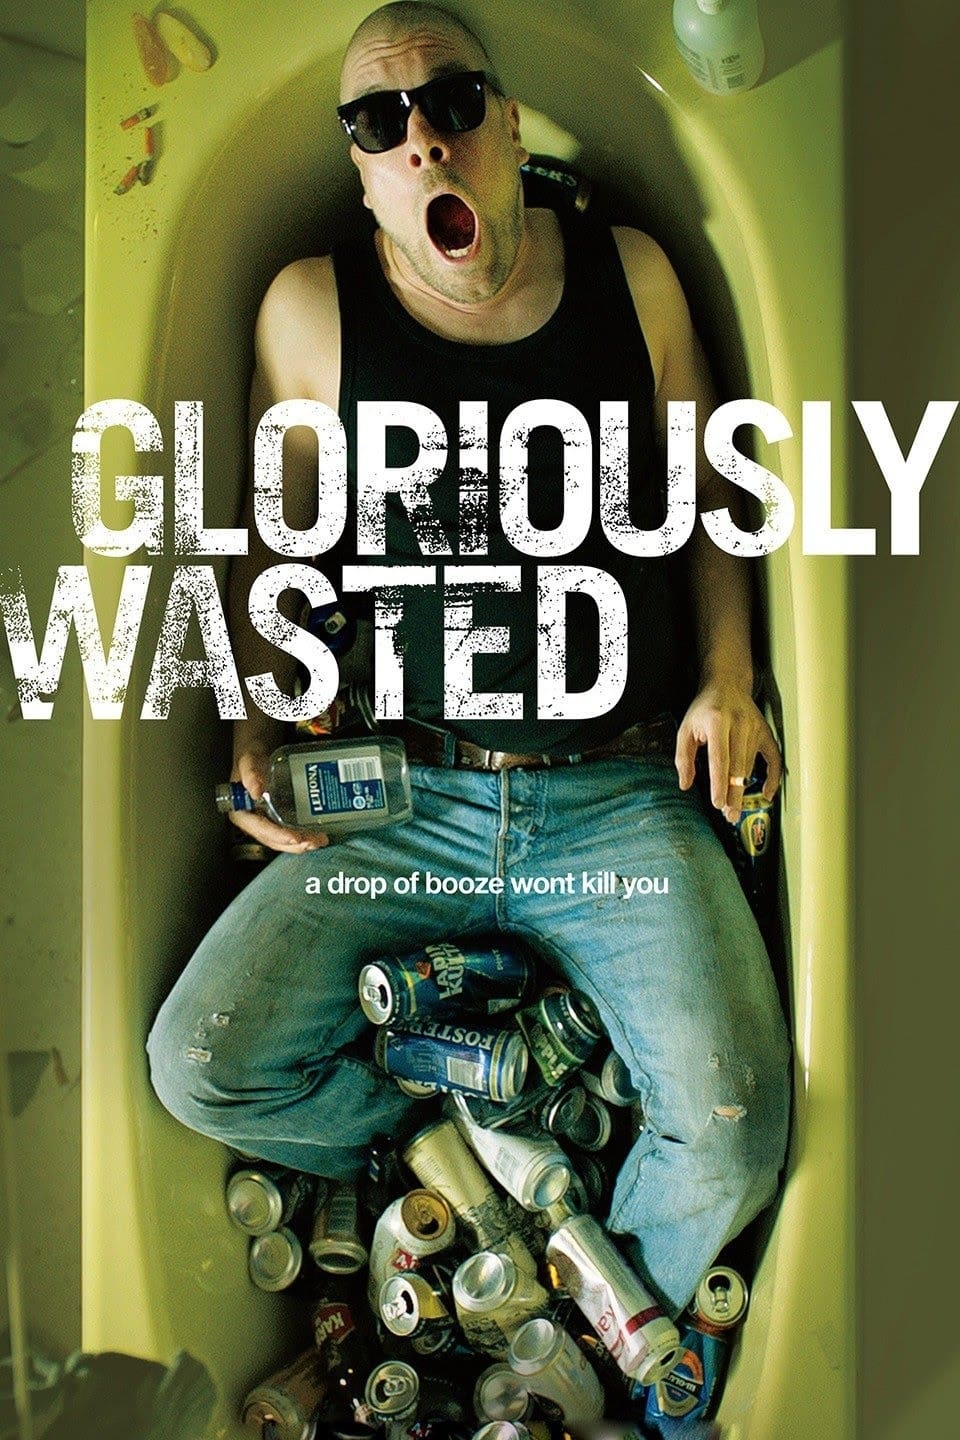 Gloriously Wasted